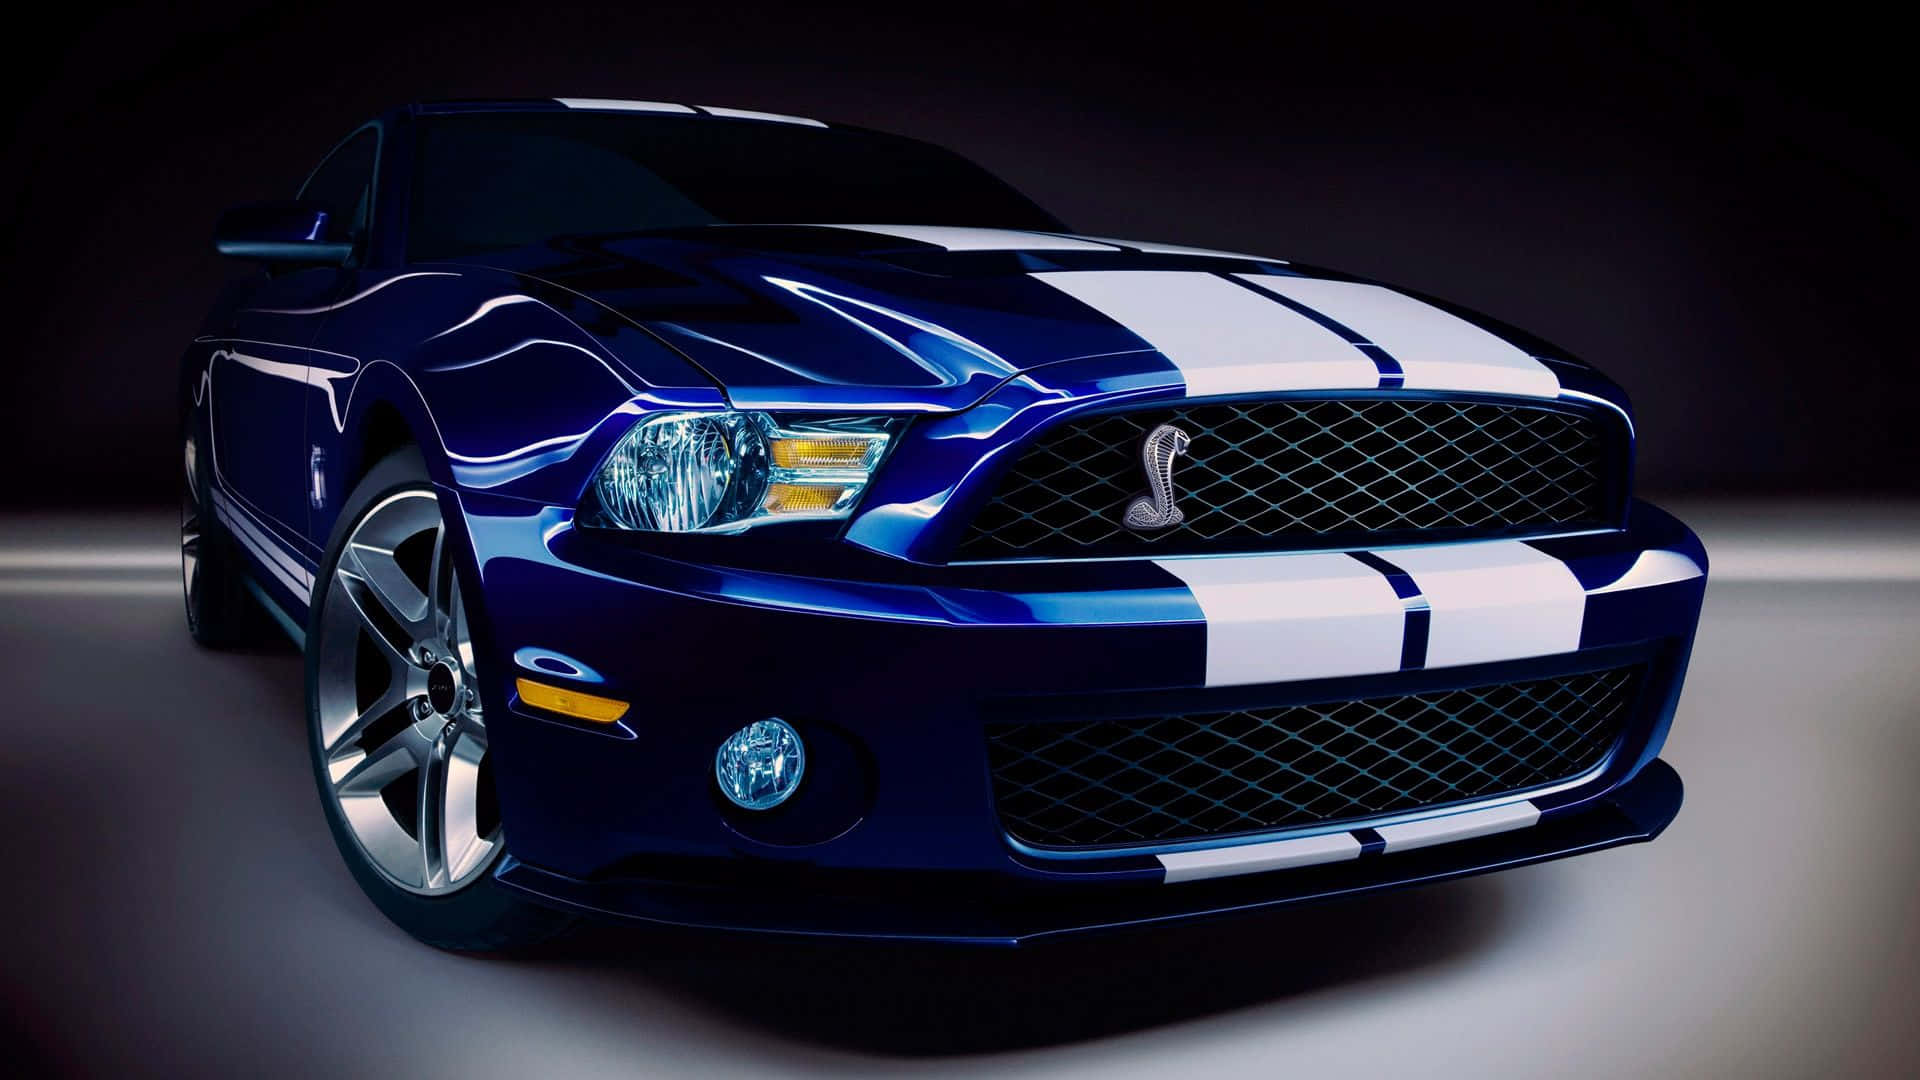 A Blue And White Ford Mustang Is Shown In A Dark Room Wallpaper